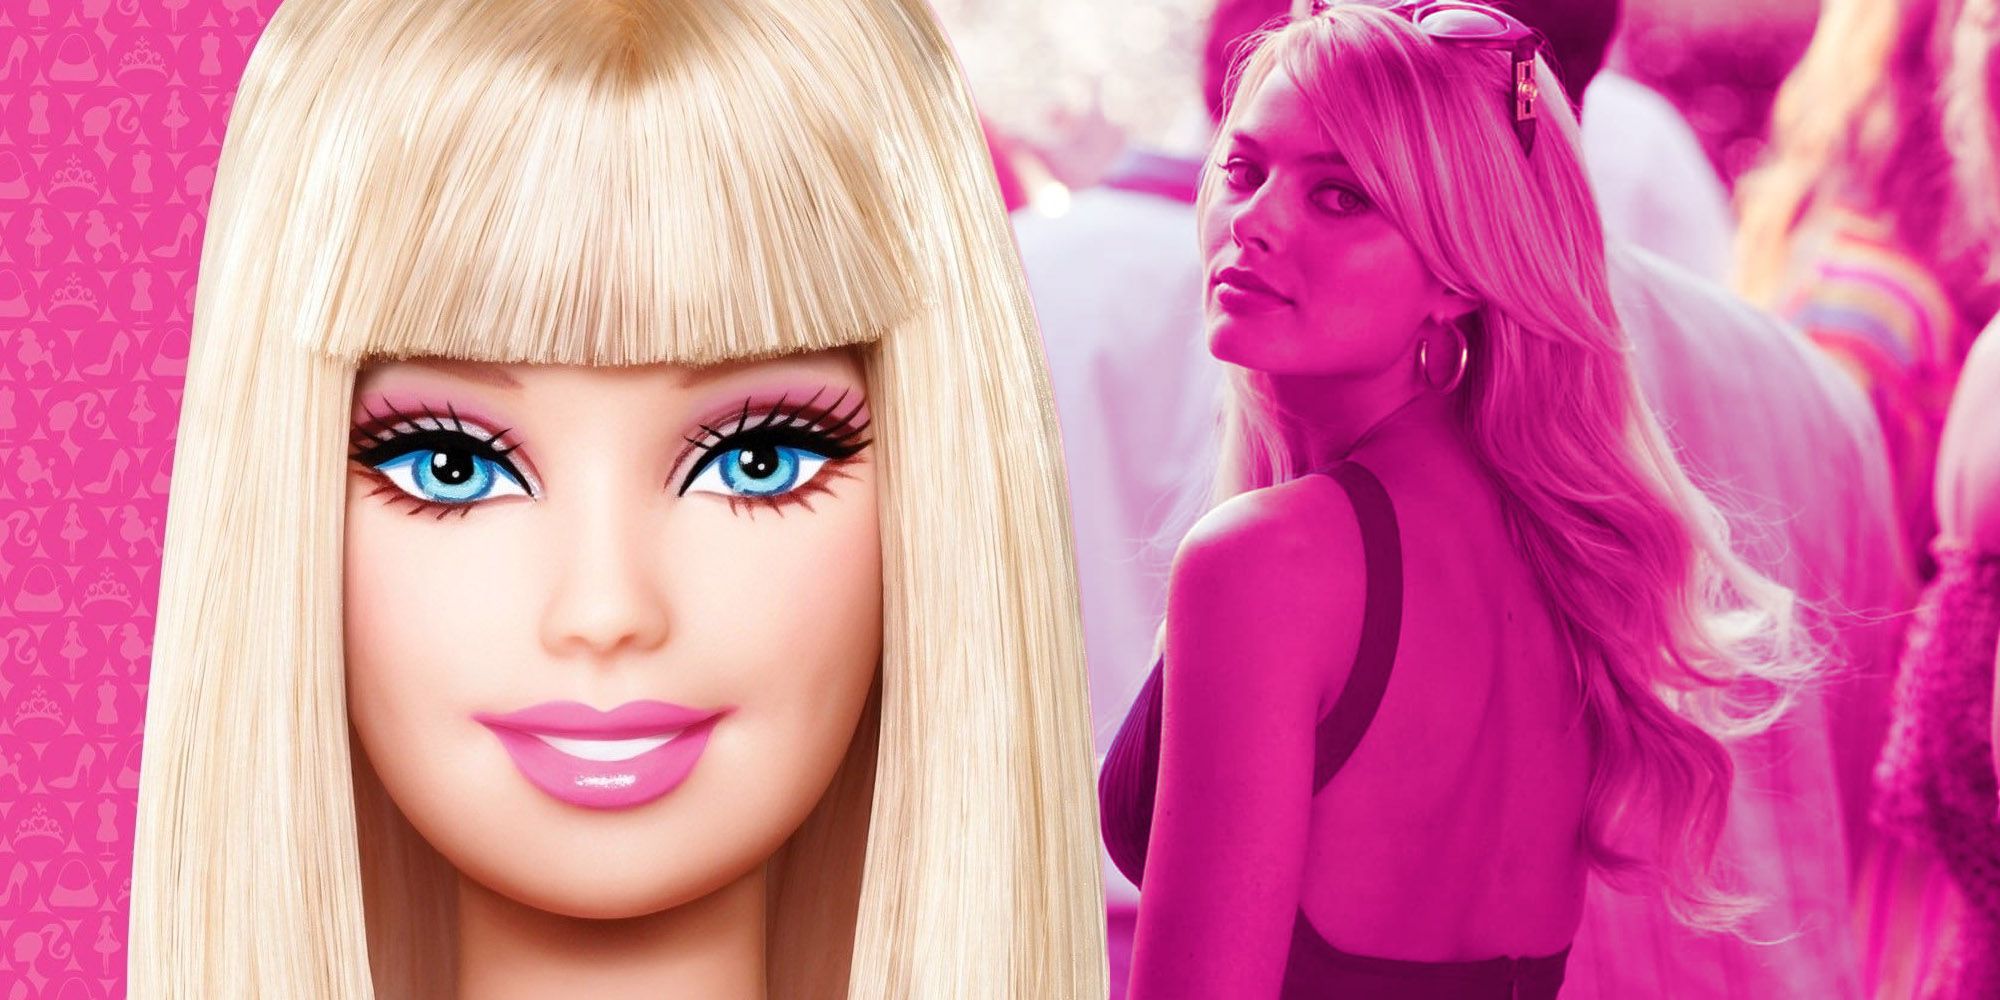 Ryan Gosling joined 'Barbie' film after finding a Ken doll in the dirt